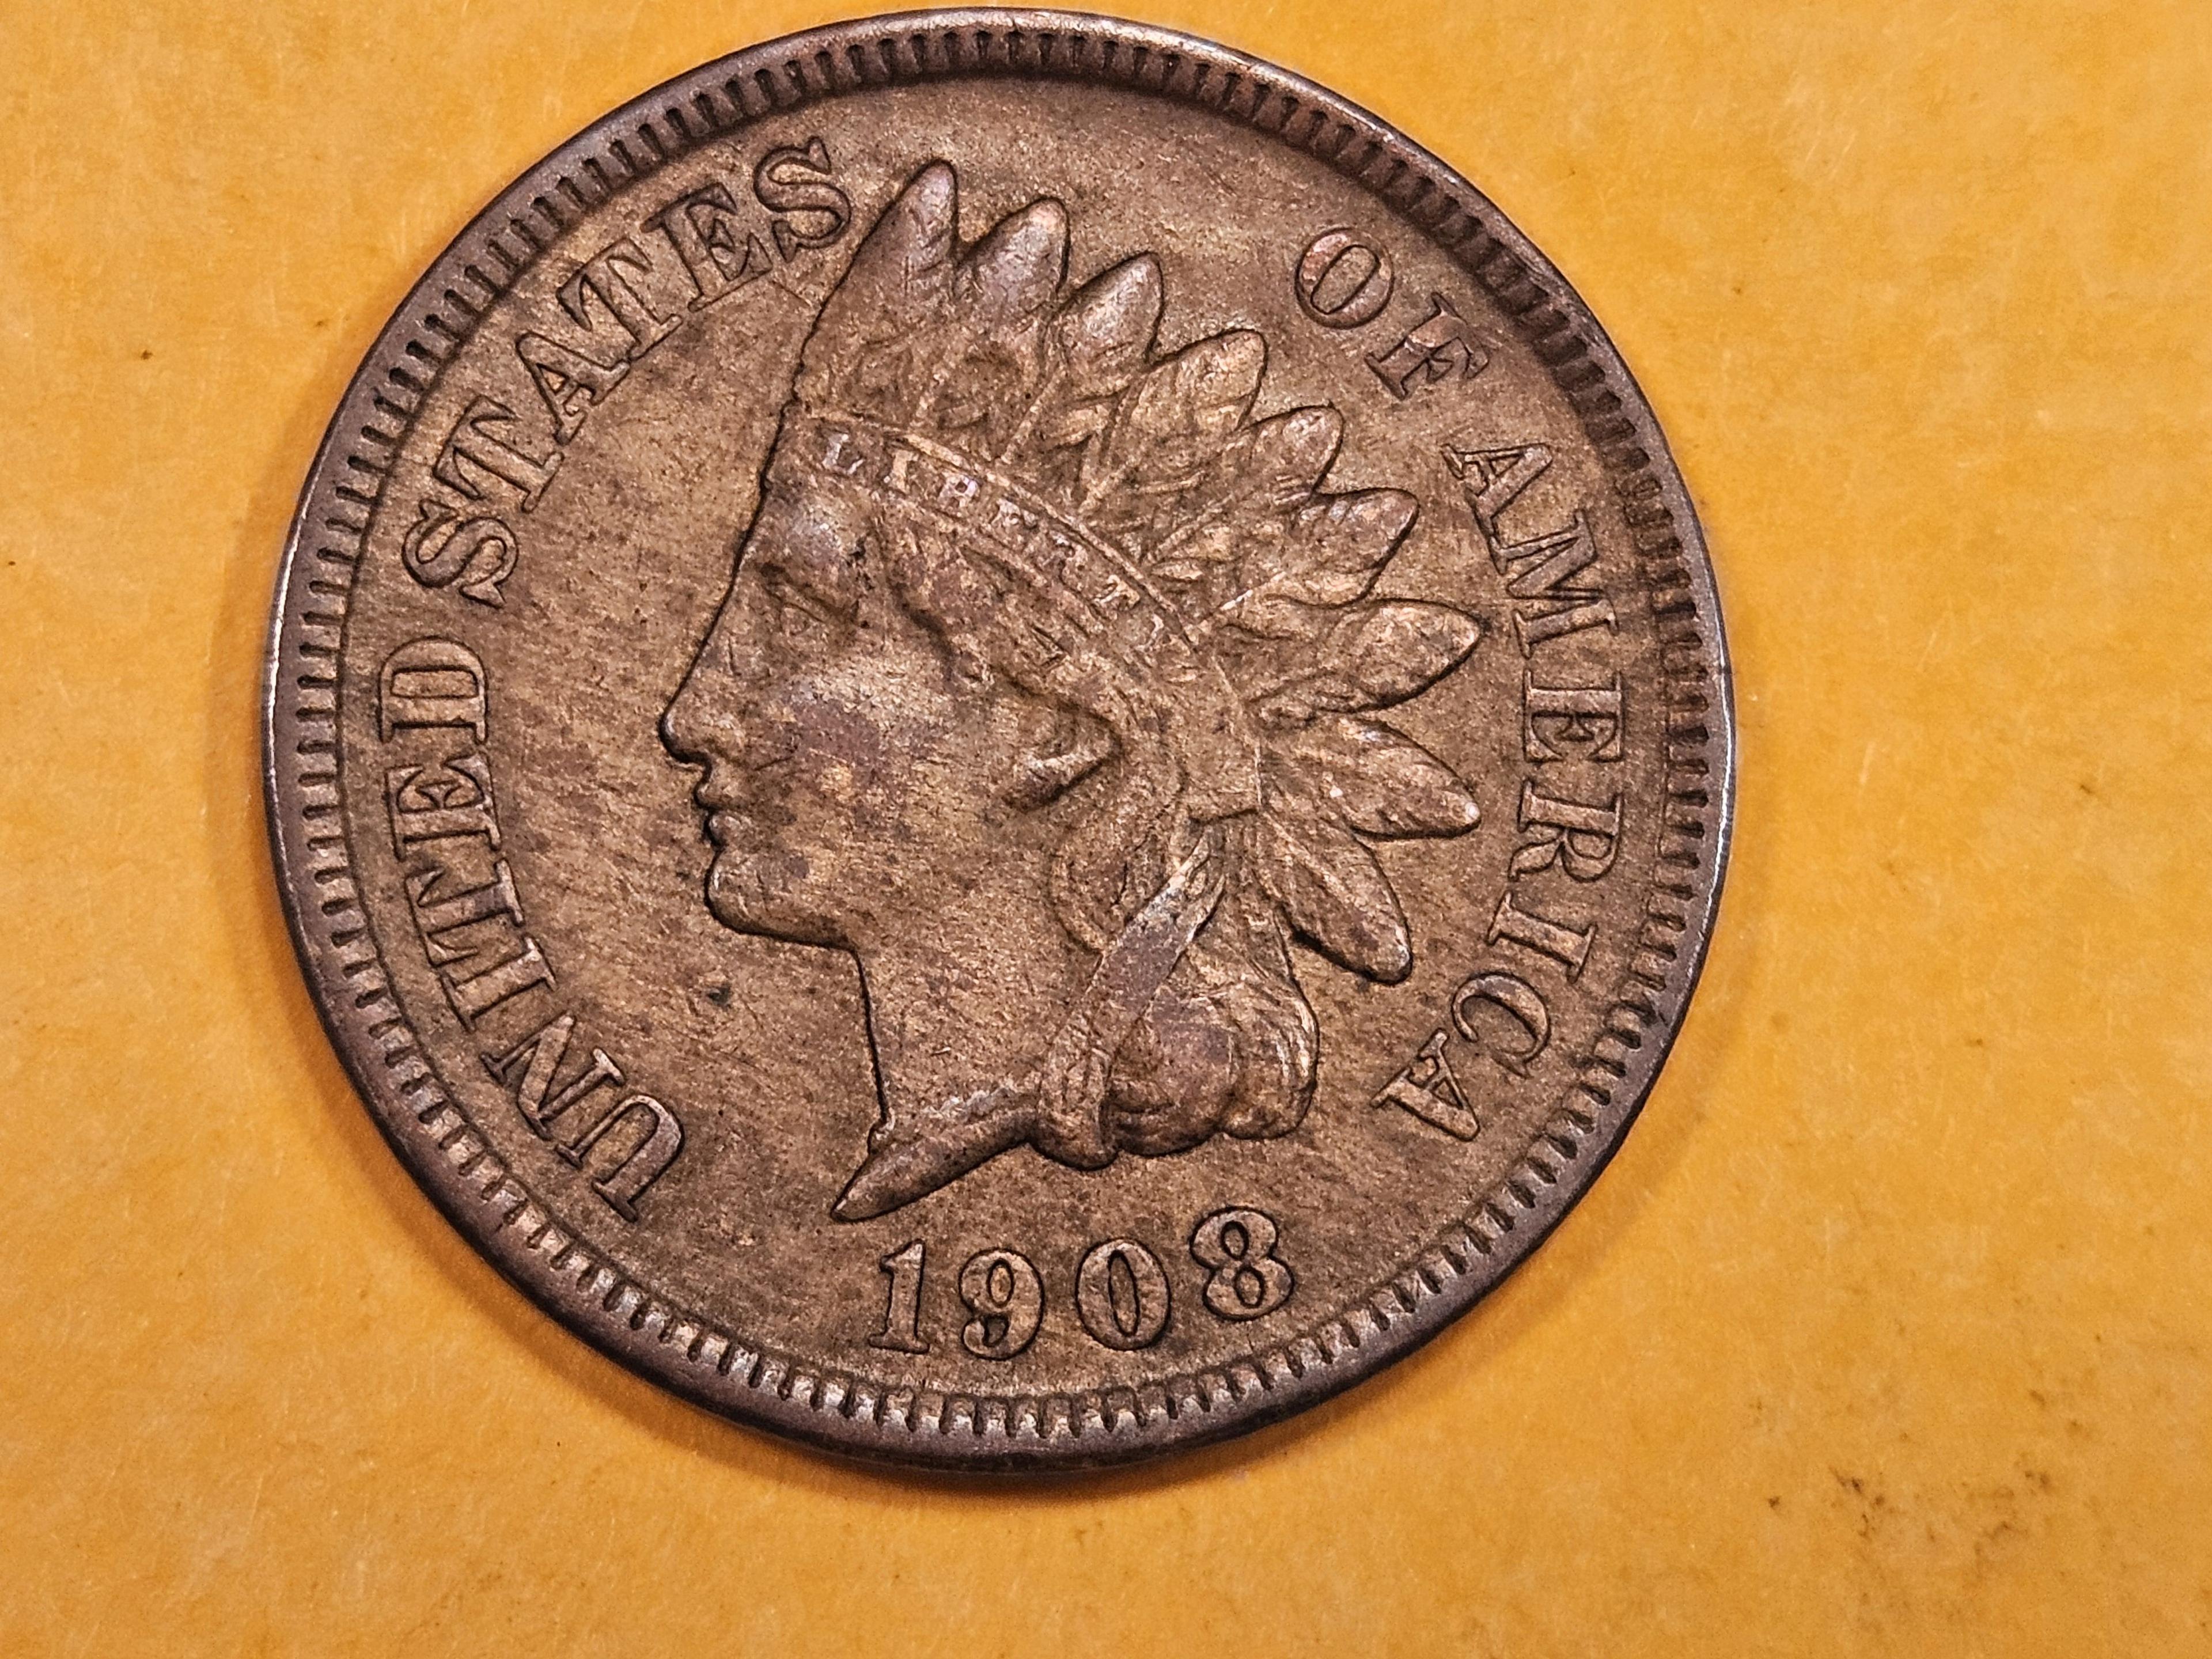 * Semi-key 1908-S Indian Cent in Very Fine - 30